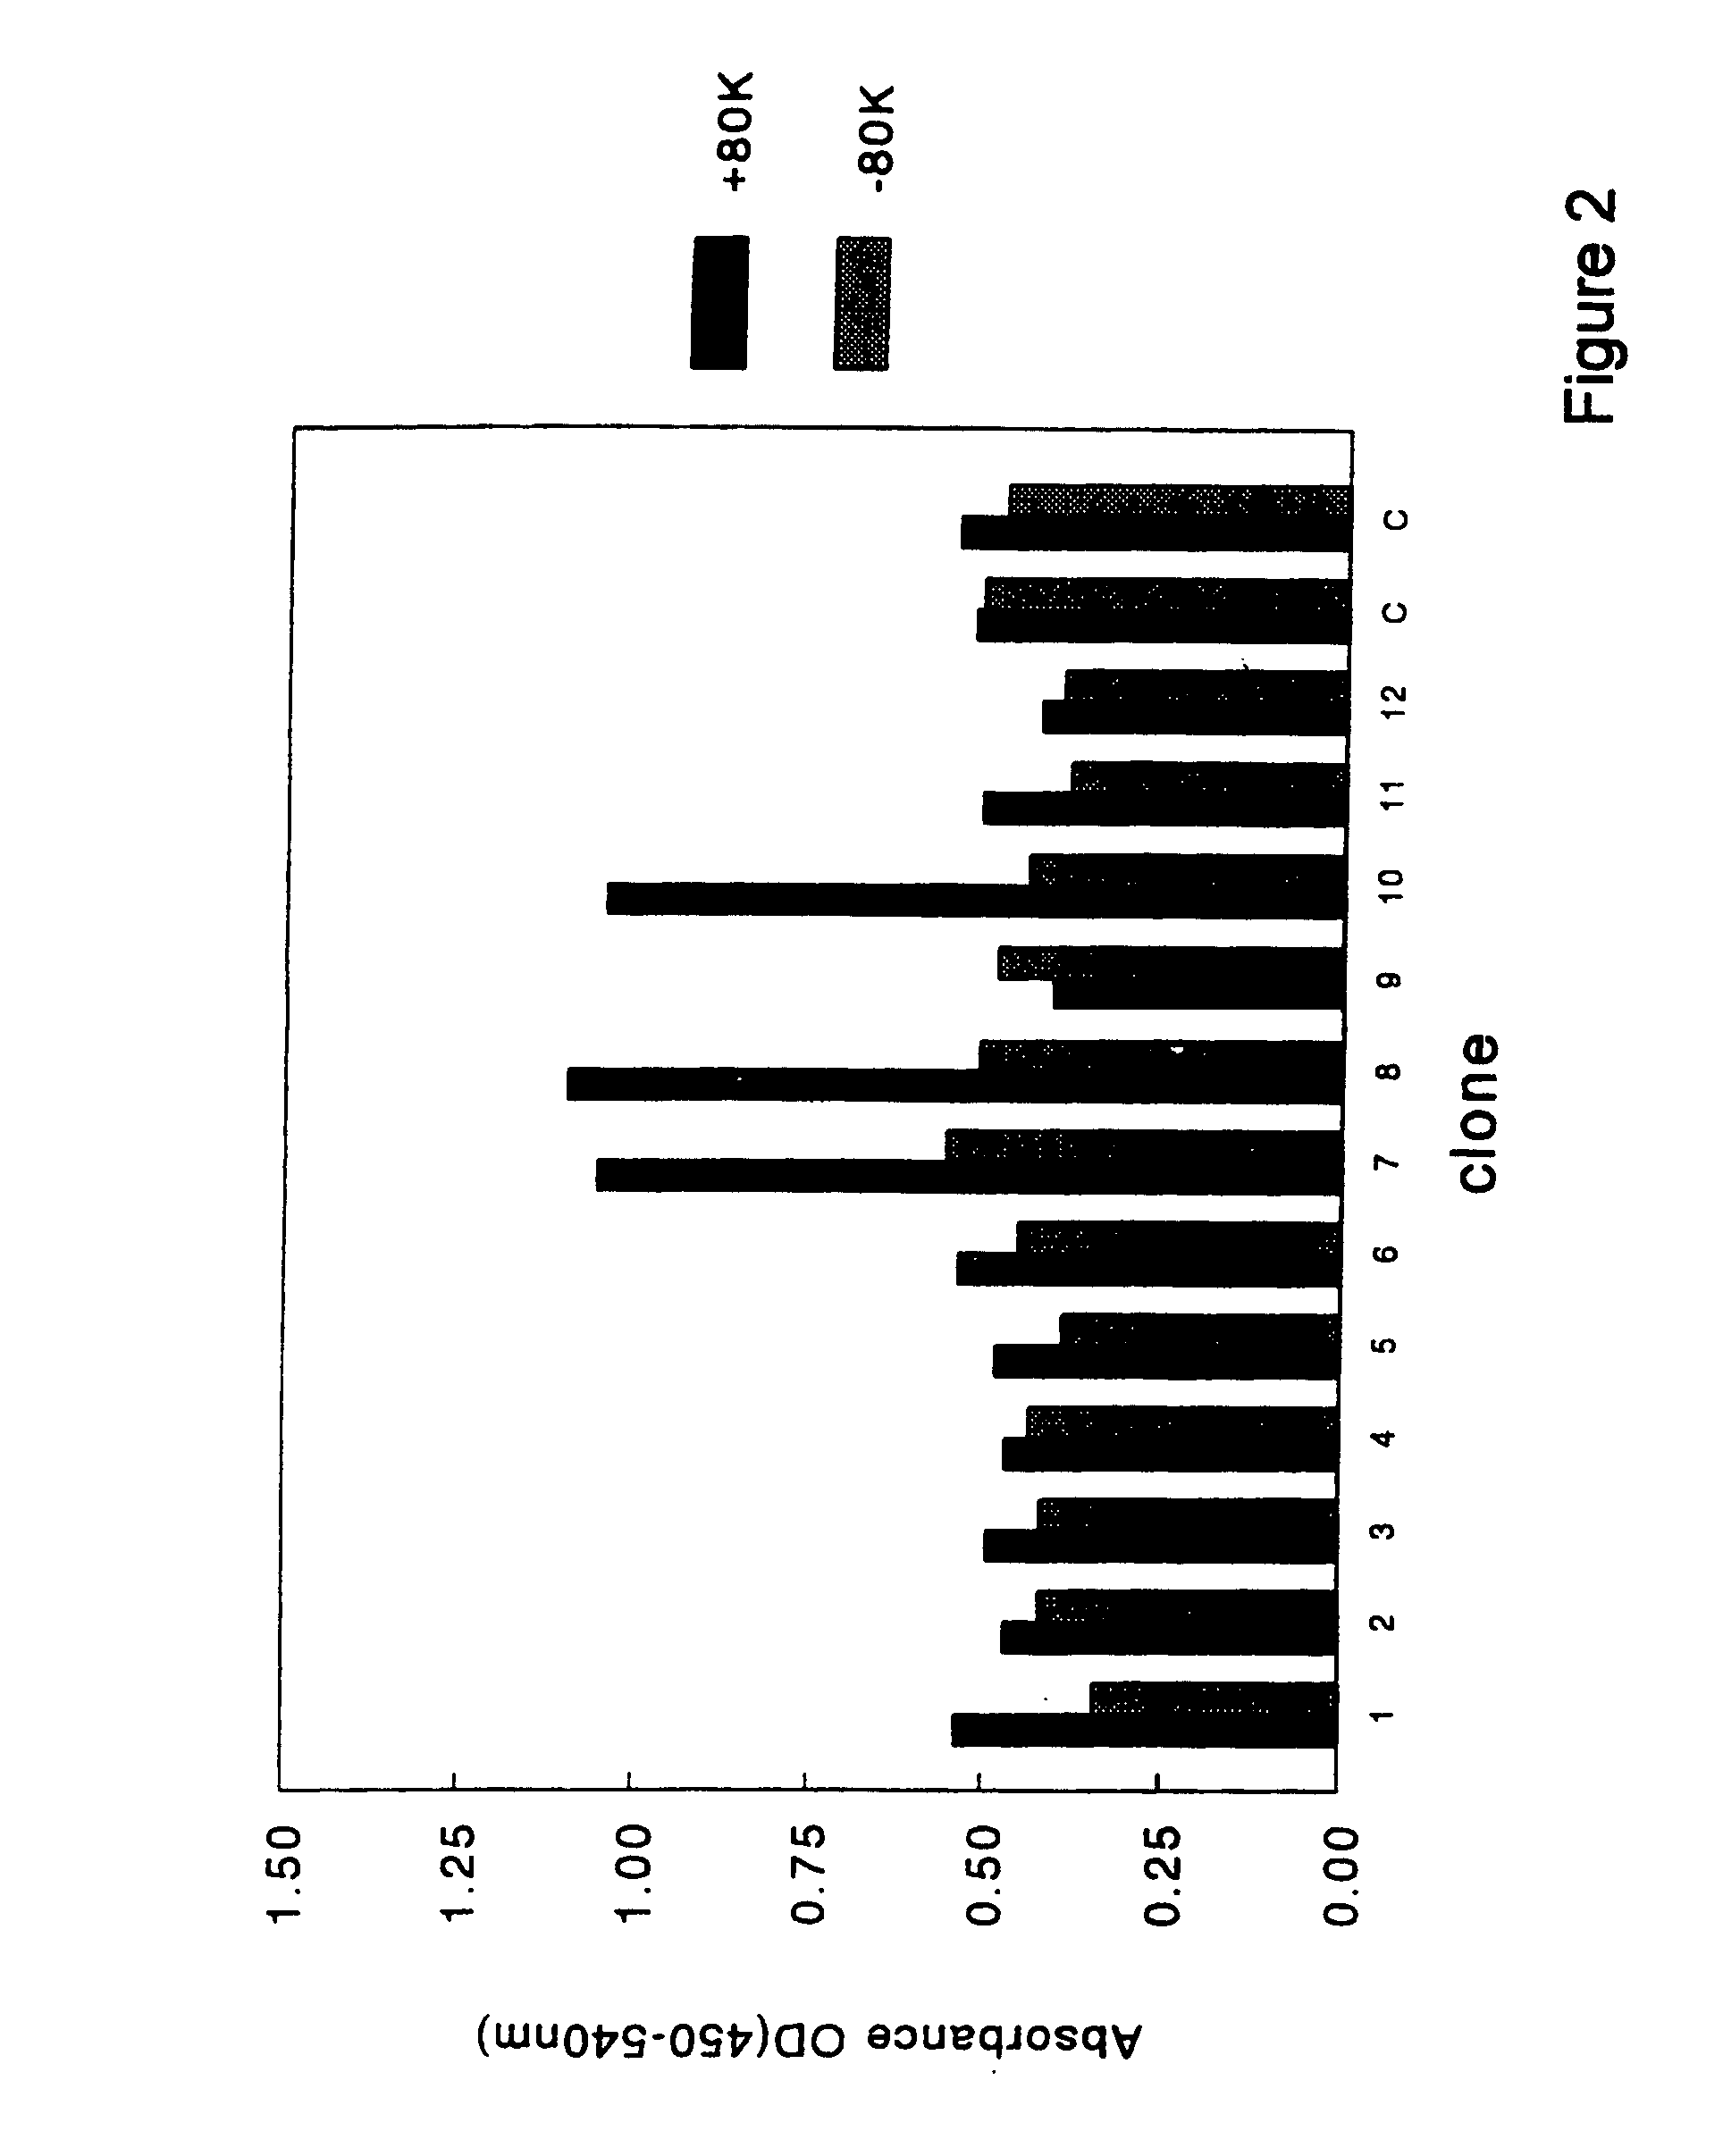 Method for diagnosis and treatment of haemophilia A patients with an inhibitor